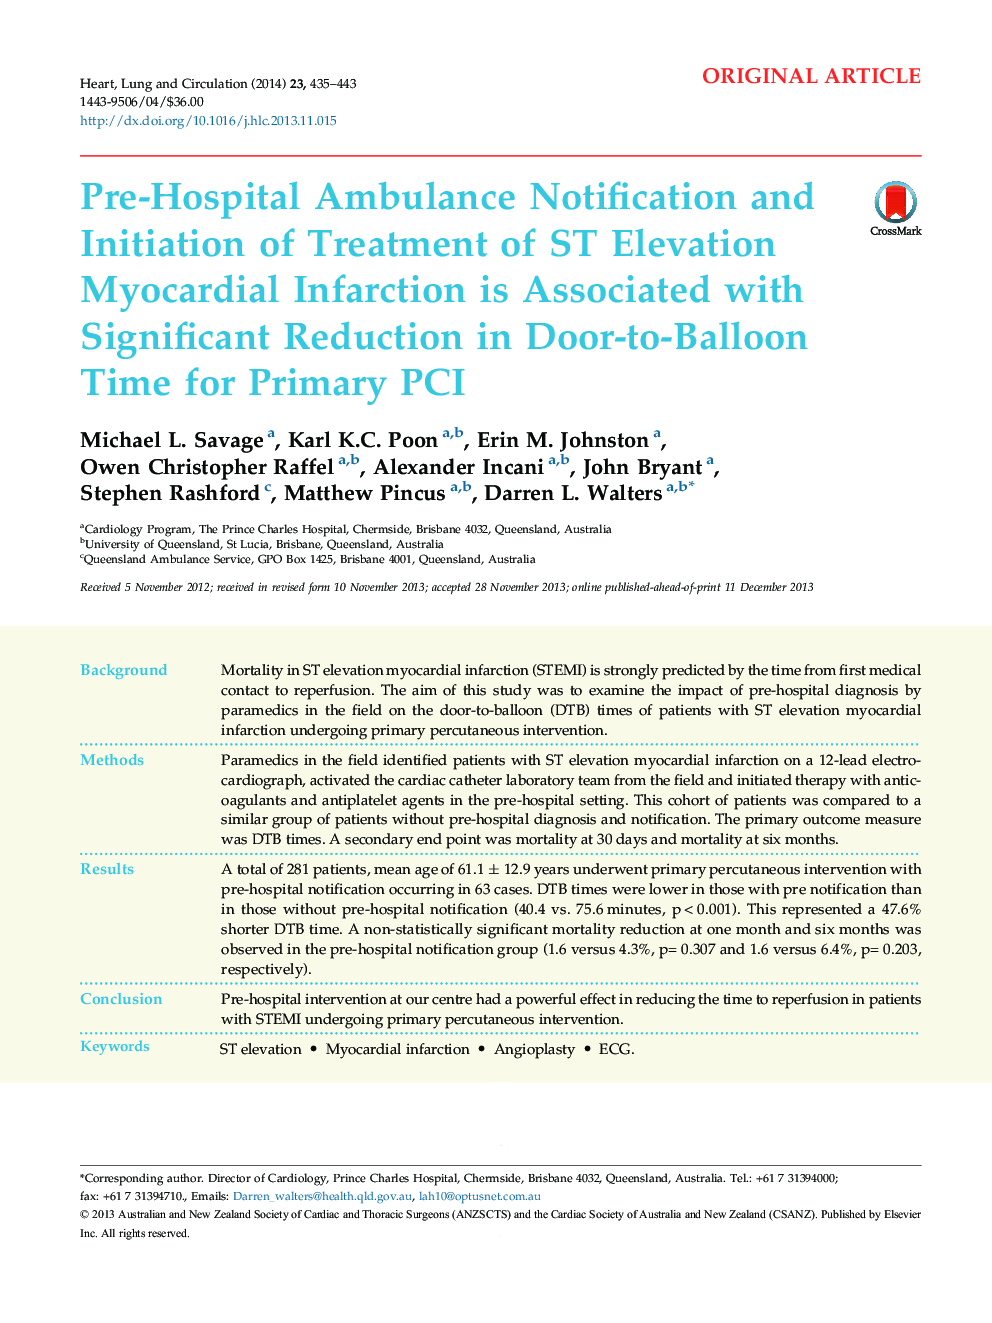 Pre-Hospital Ambulance Notification and Initiation of Treatment of ST Elevation Myocardial Infarction is Associated with Significant Reduction in Door-to-Balloon Time for Primary PCI